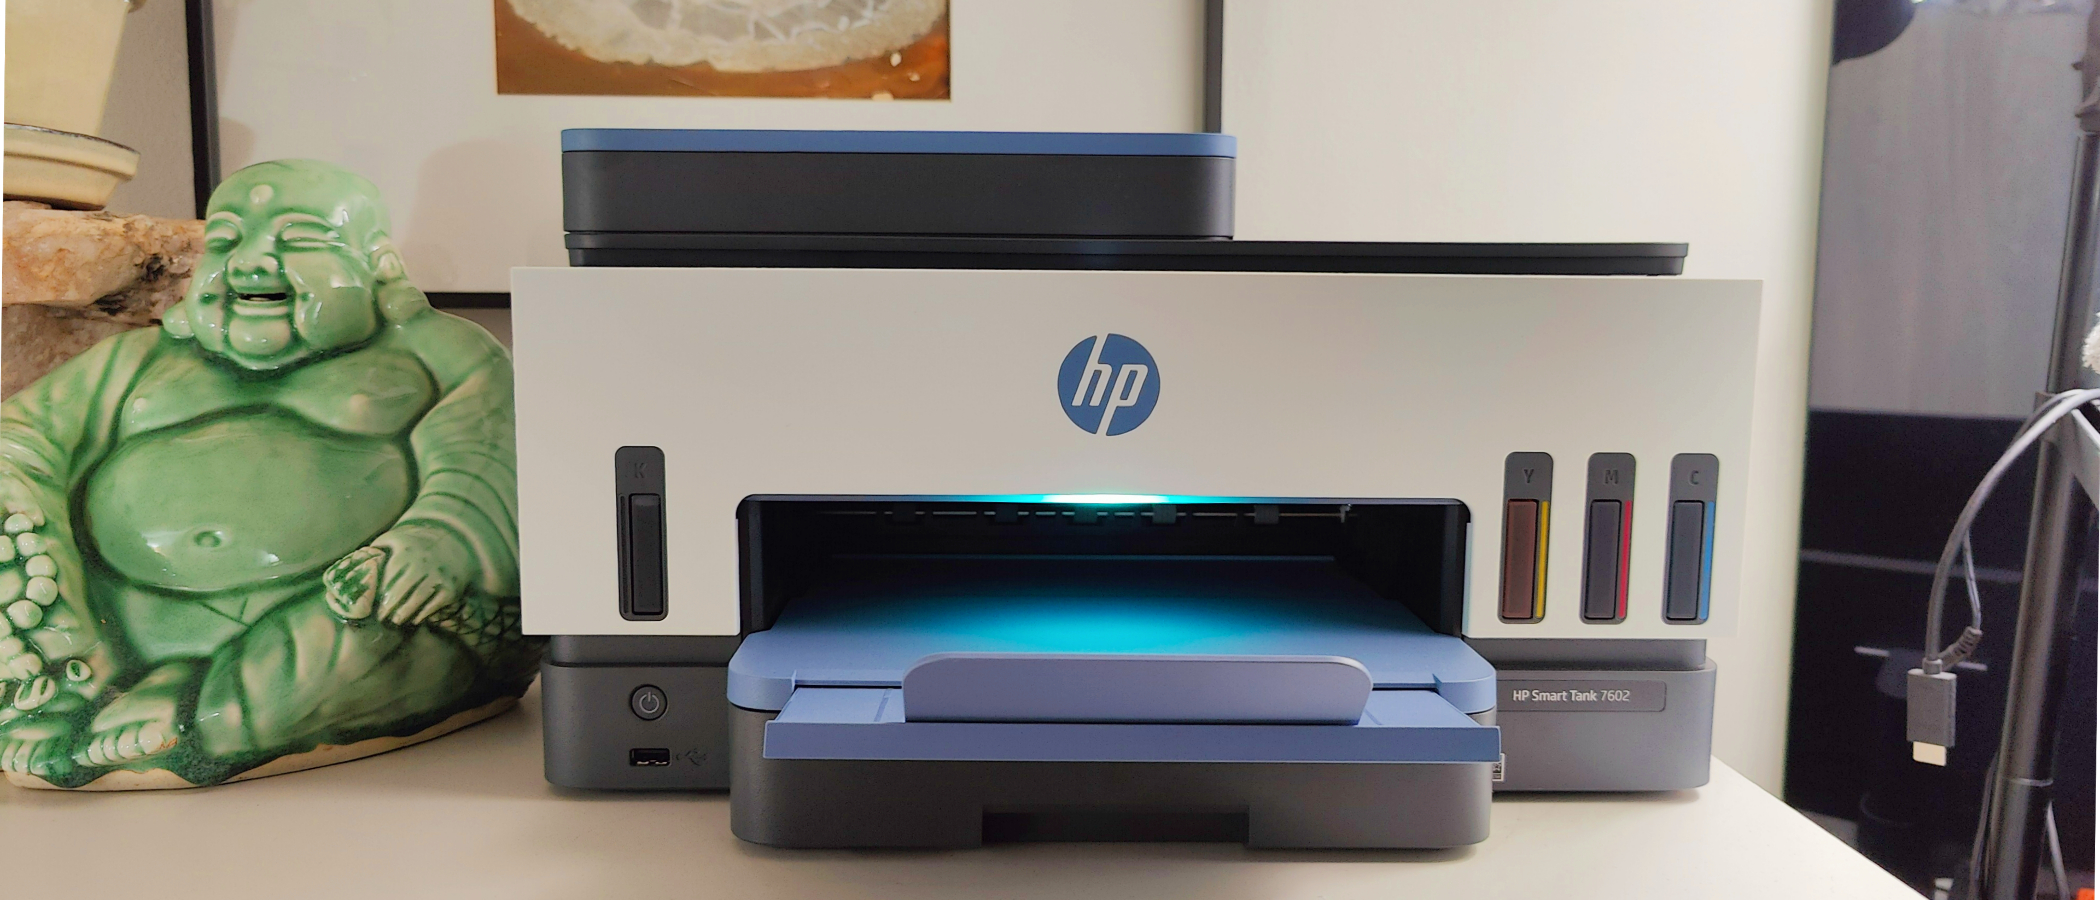 Tremble bande peddling HP Smart Tank 7602 All-in-One printer review | Laptop Mag